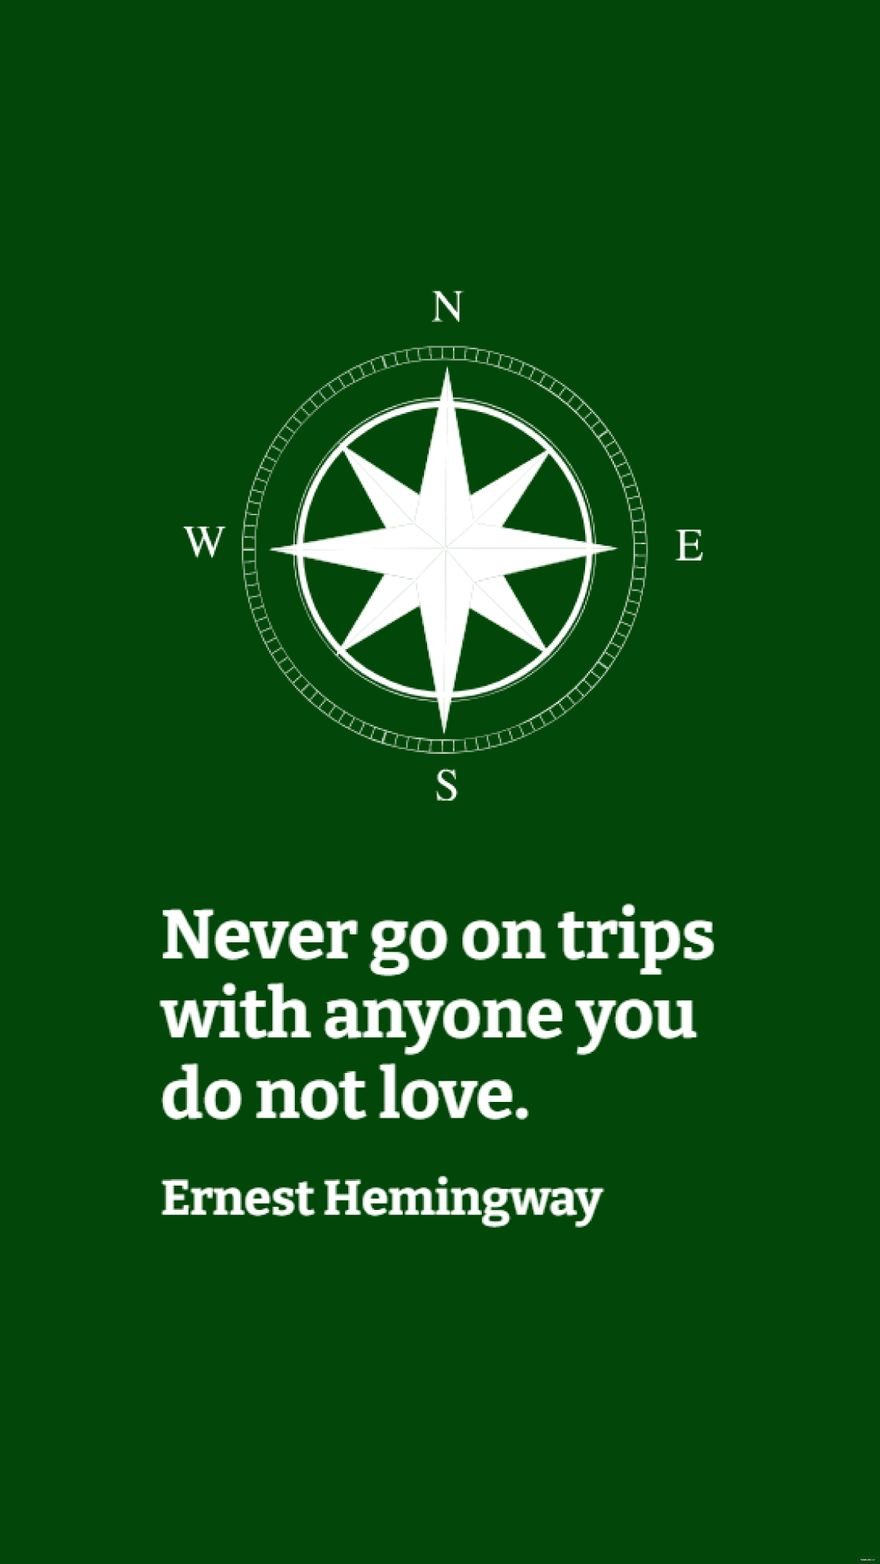 Ernest Hemingway - Never go on trips with anyone you do not love.